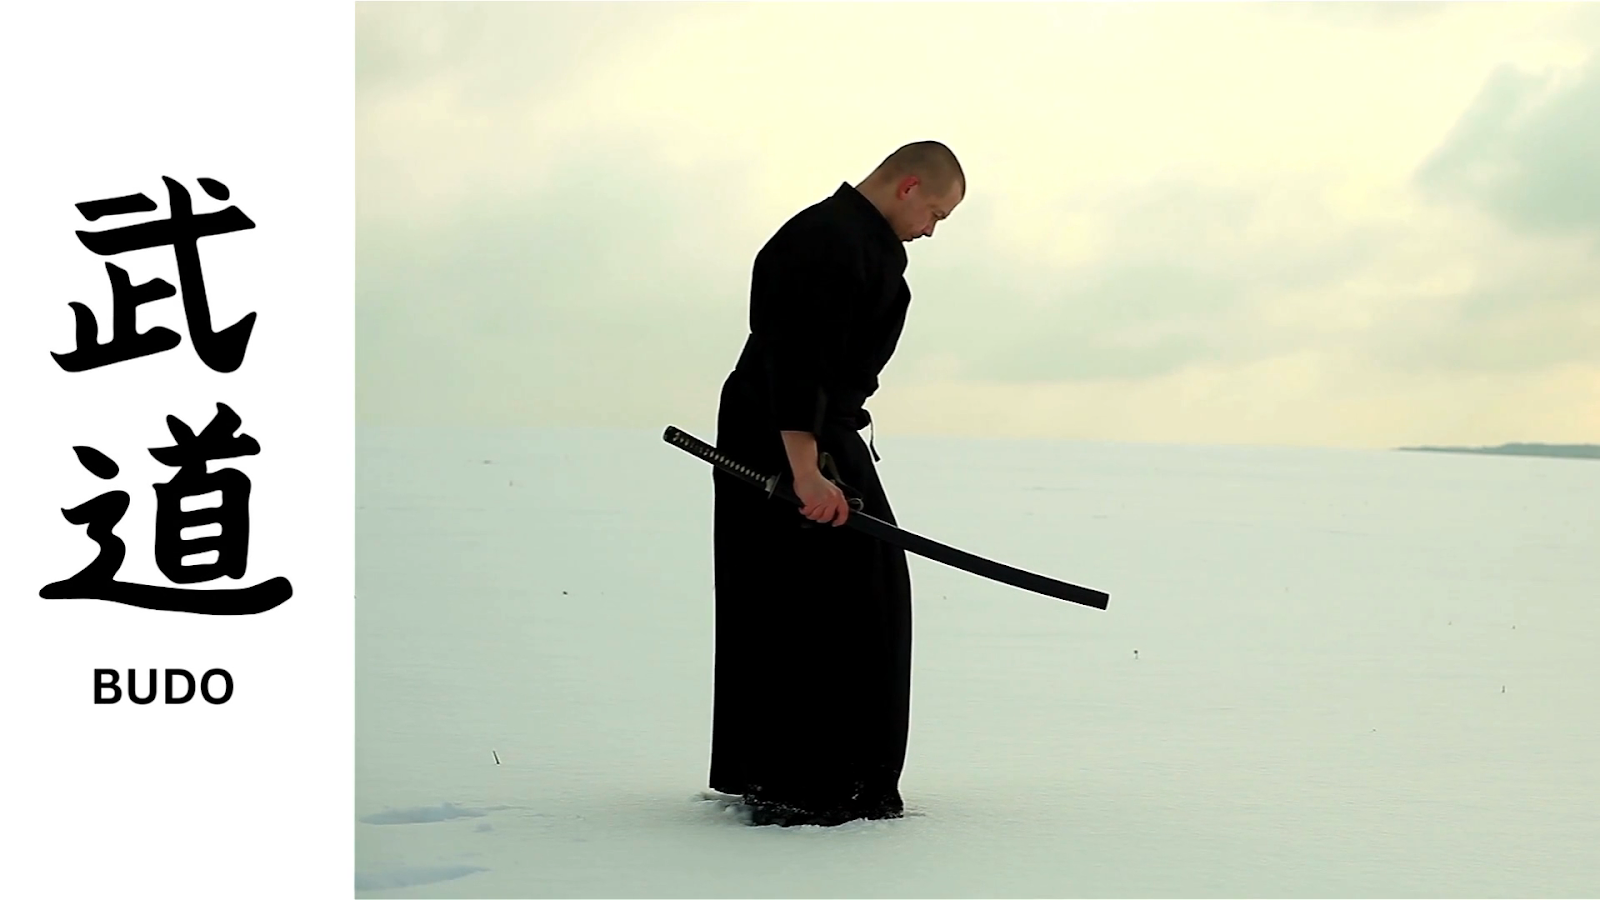 Budo uses a path based approached like Kevin's high intensity training